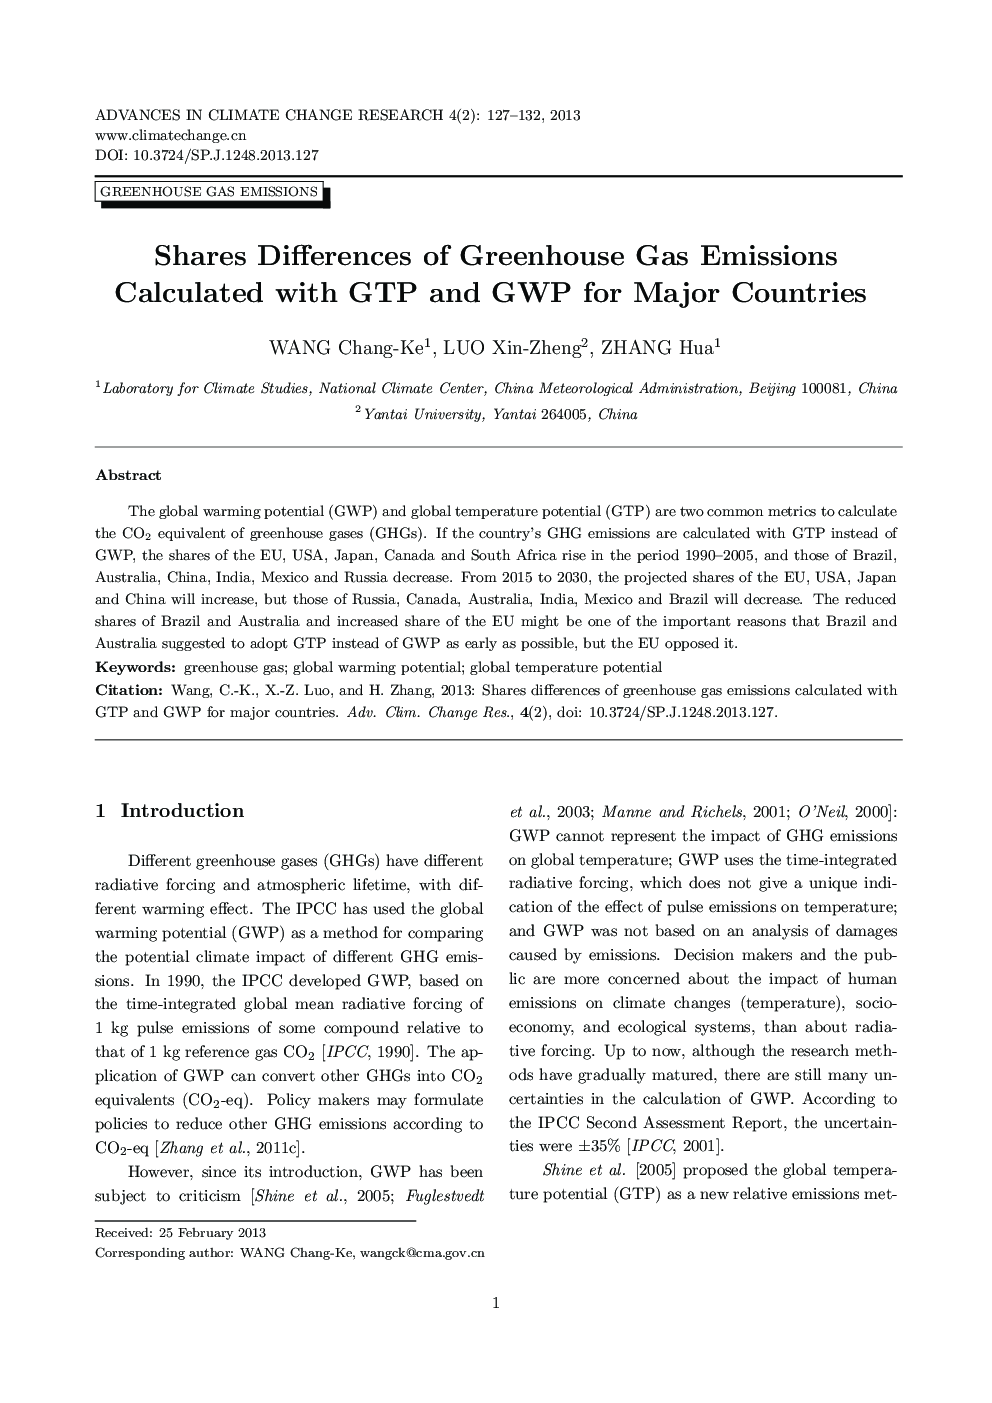 Shares Differences of Greenhouse Gas Emissions Calculated with GTP and GWP for Major Countries